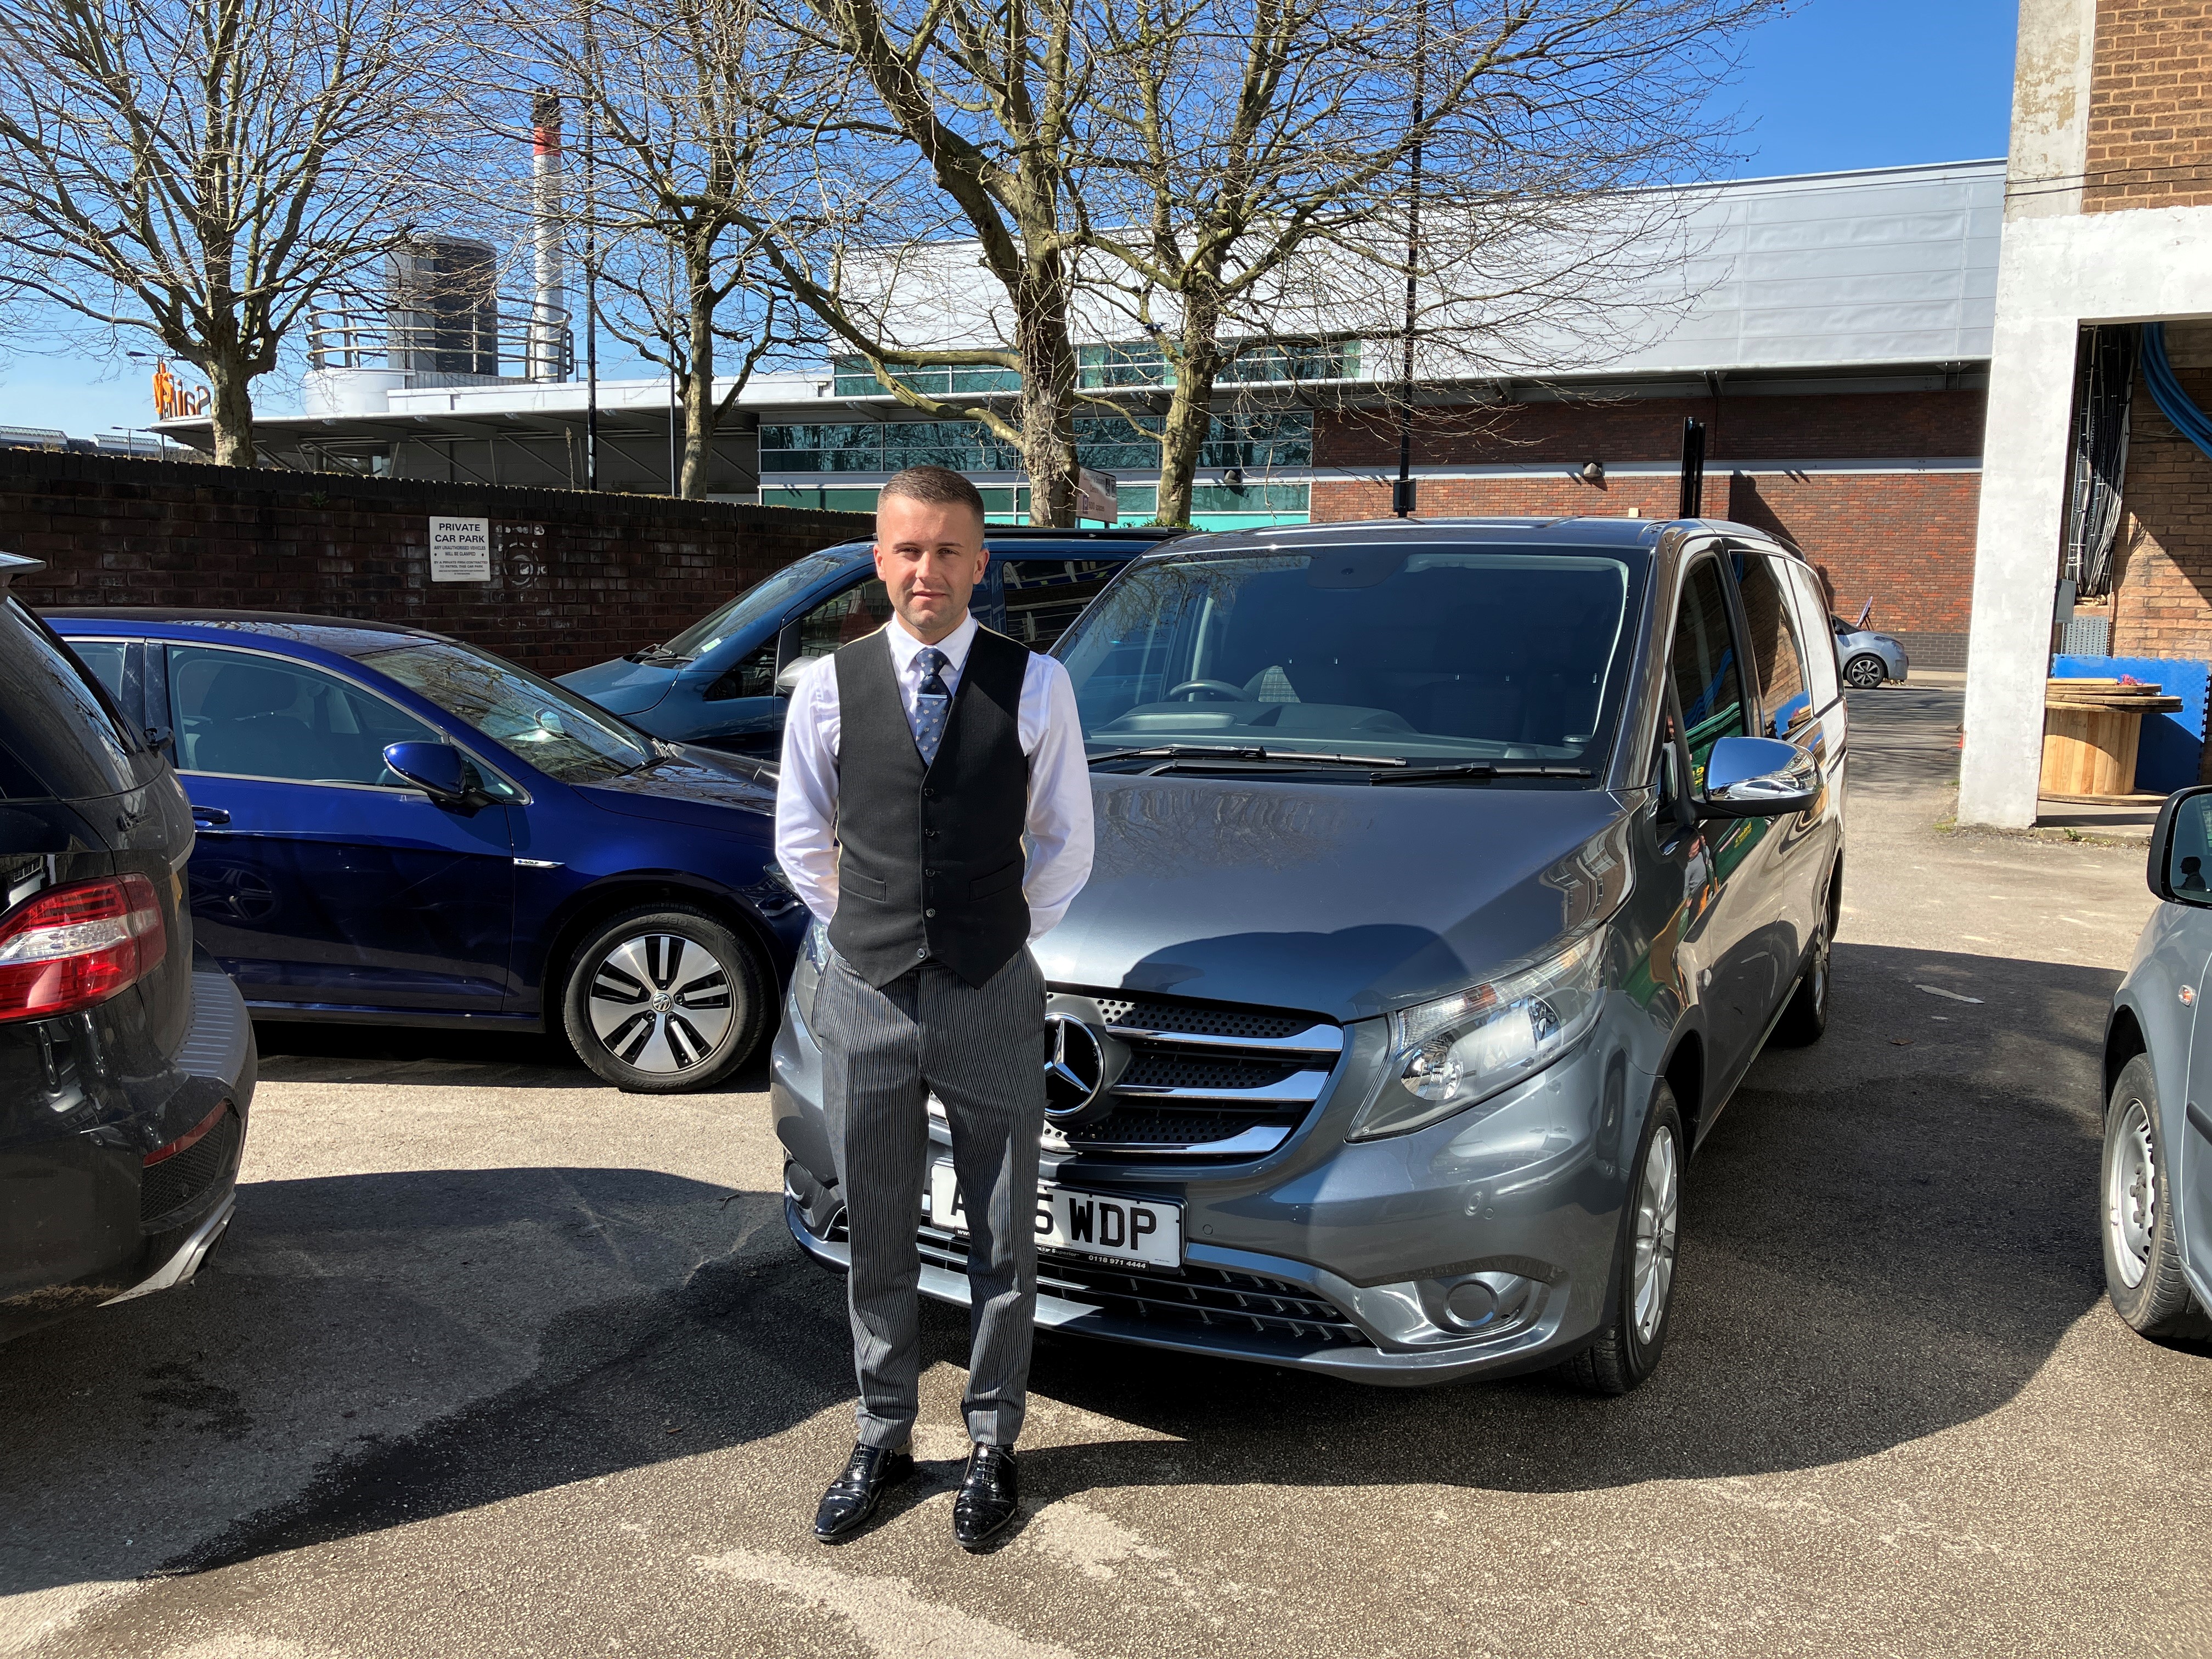 Read more about the article Superior Vito and movie star hearse join T J Parry fleet